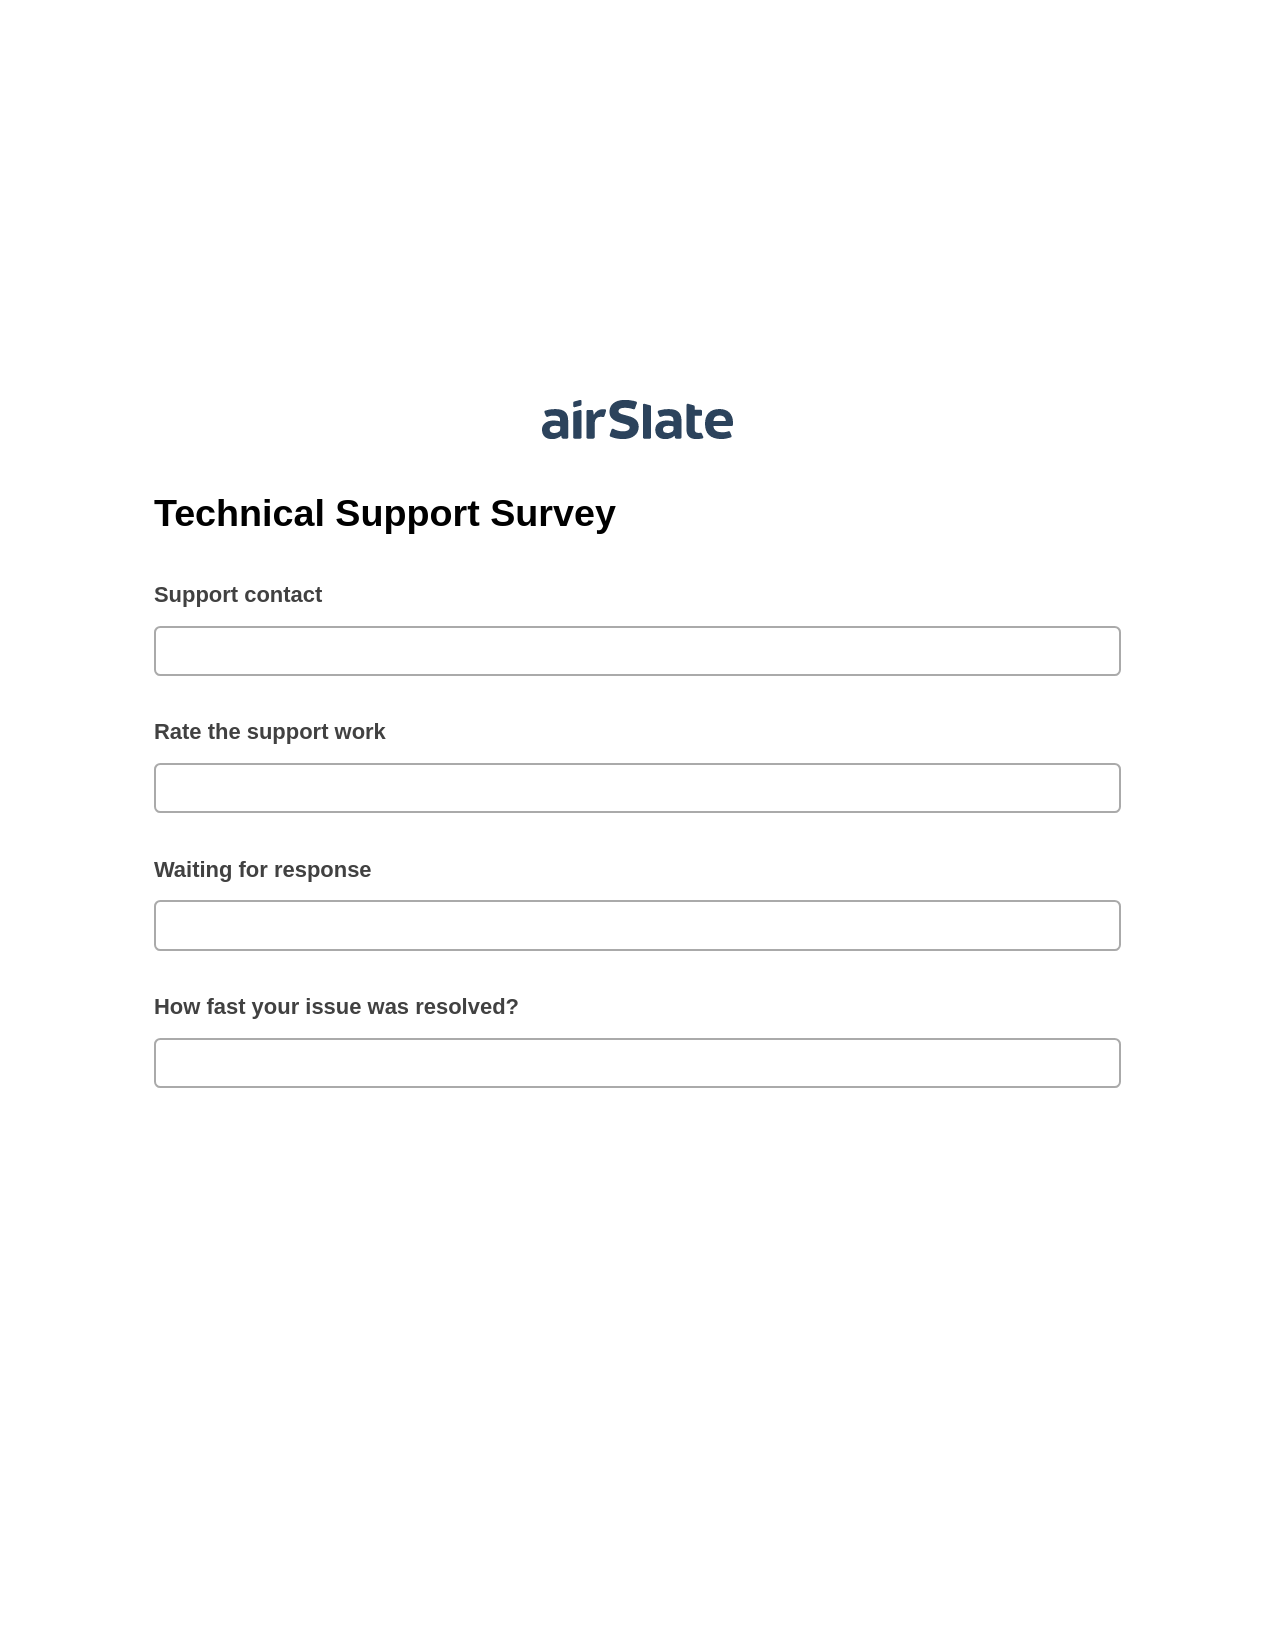 Technical Support Survey Pre-fill from MS Dynamics 365 Records, Send a Slate to MS Dynamics 365 Contact Bot, Archive to Dropbox Bot